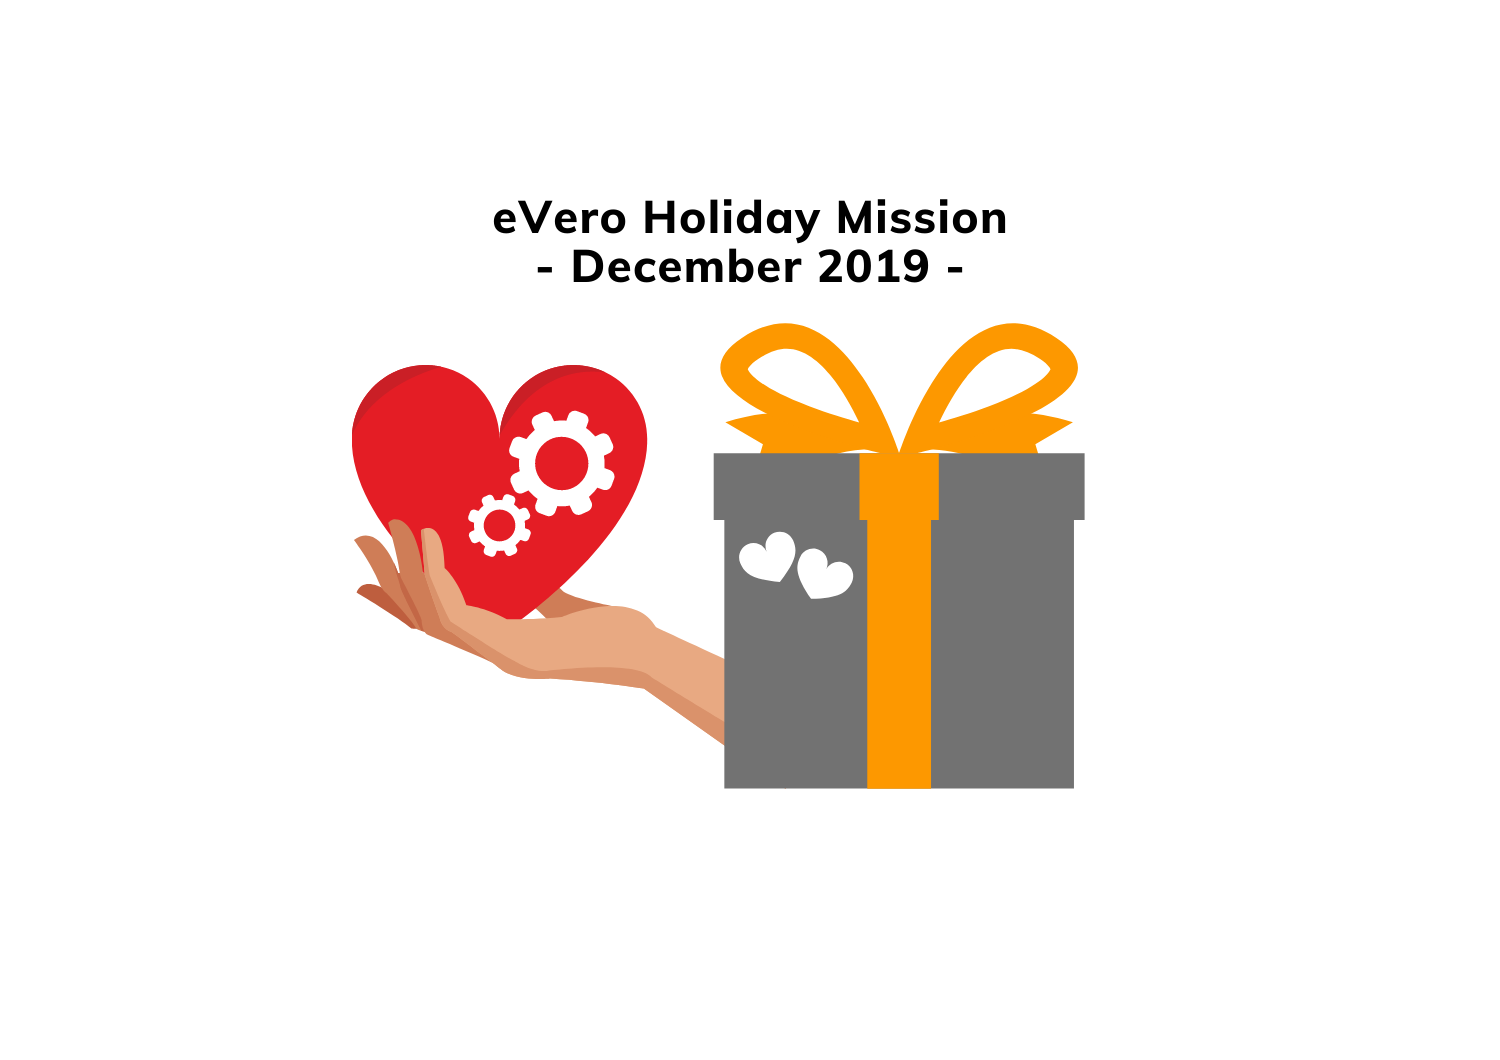 2019 Holiday Mission and Charitable Work